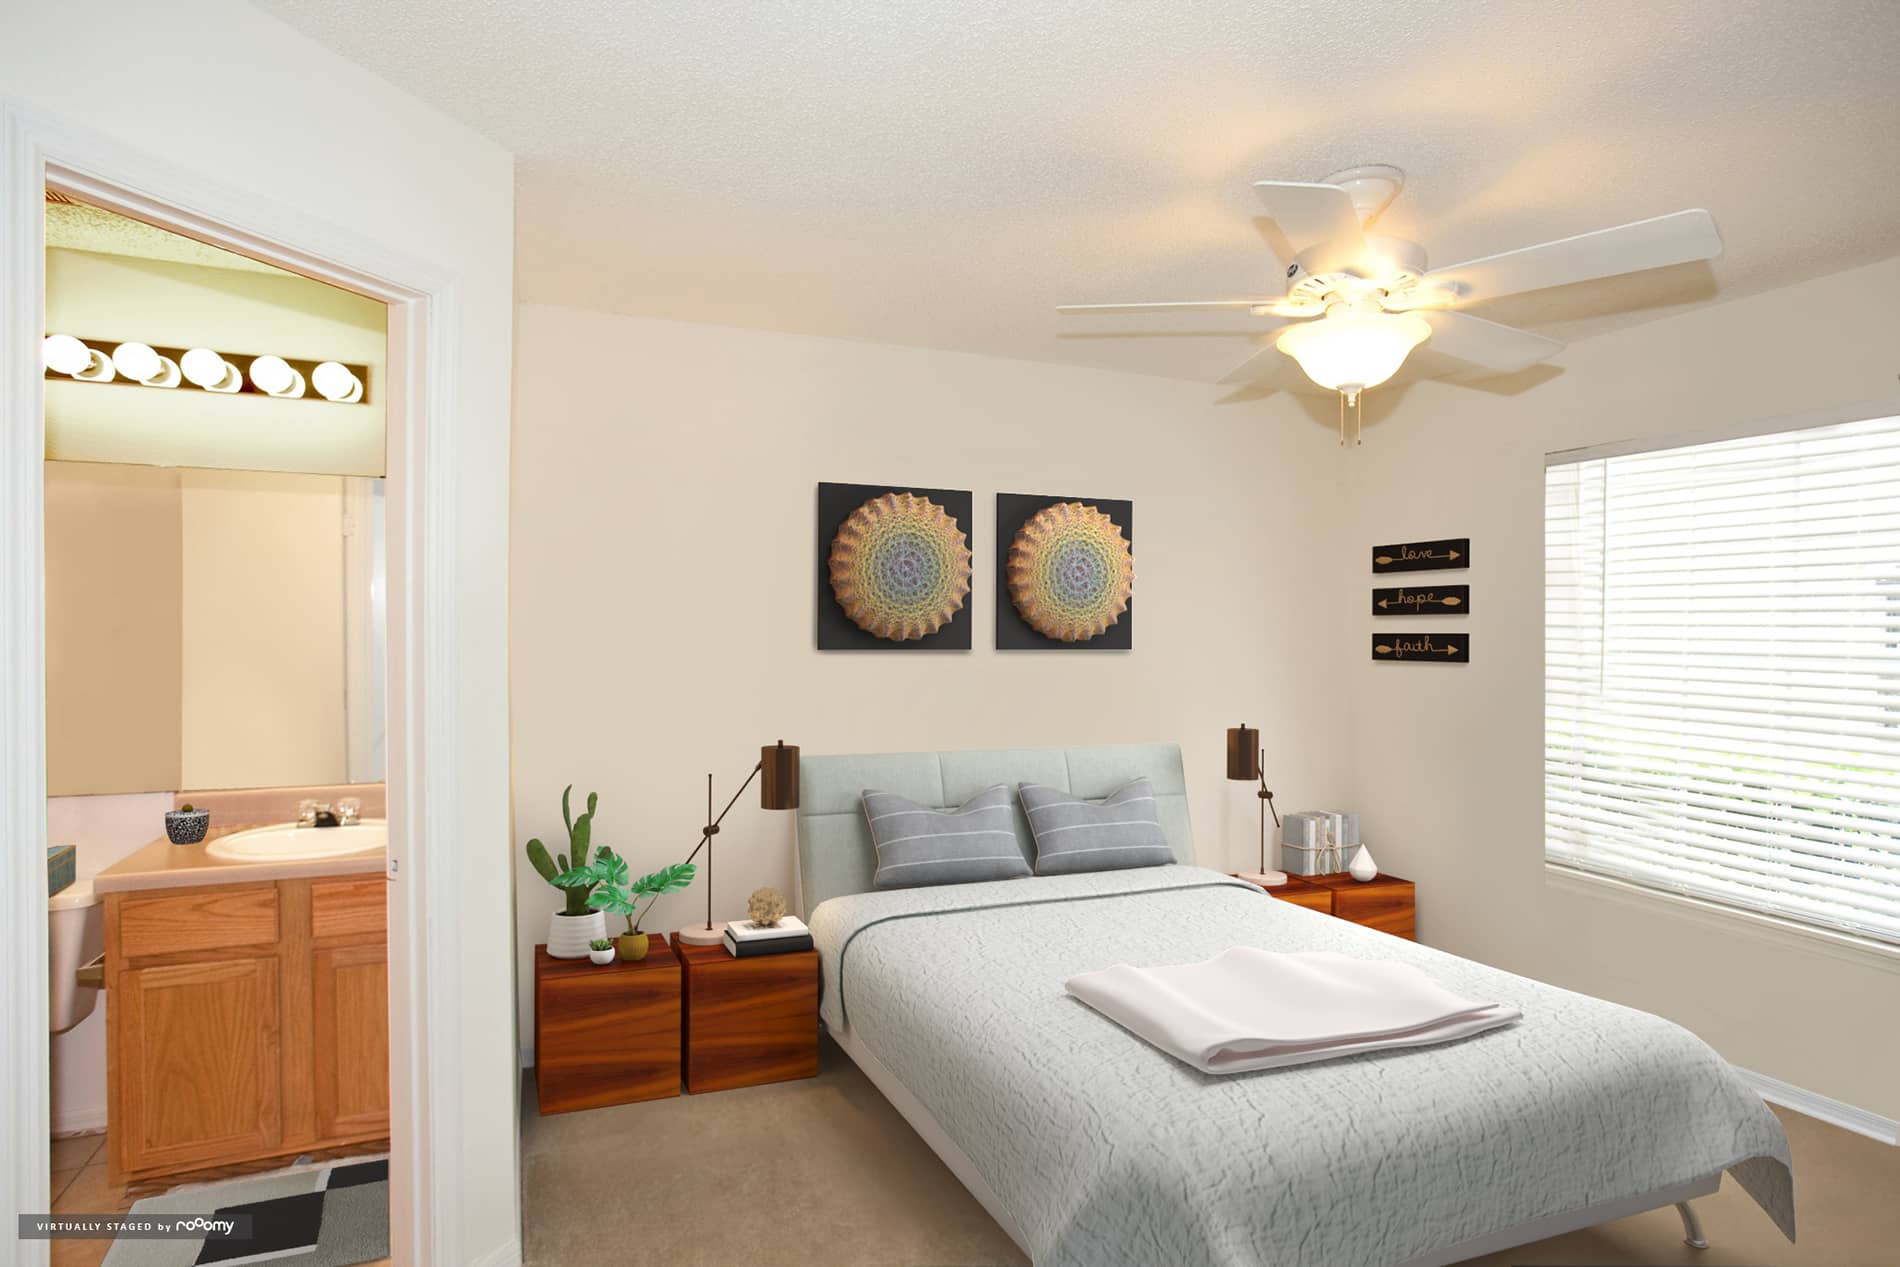 Regatta Shores apartment bedroom virtually staged by RooOmy